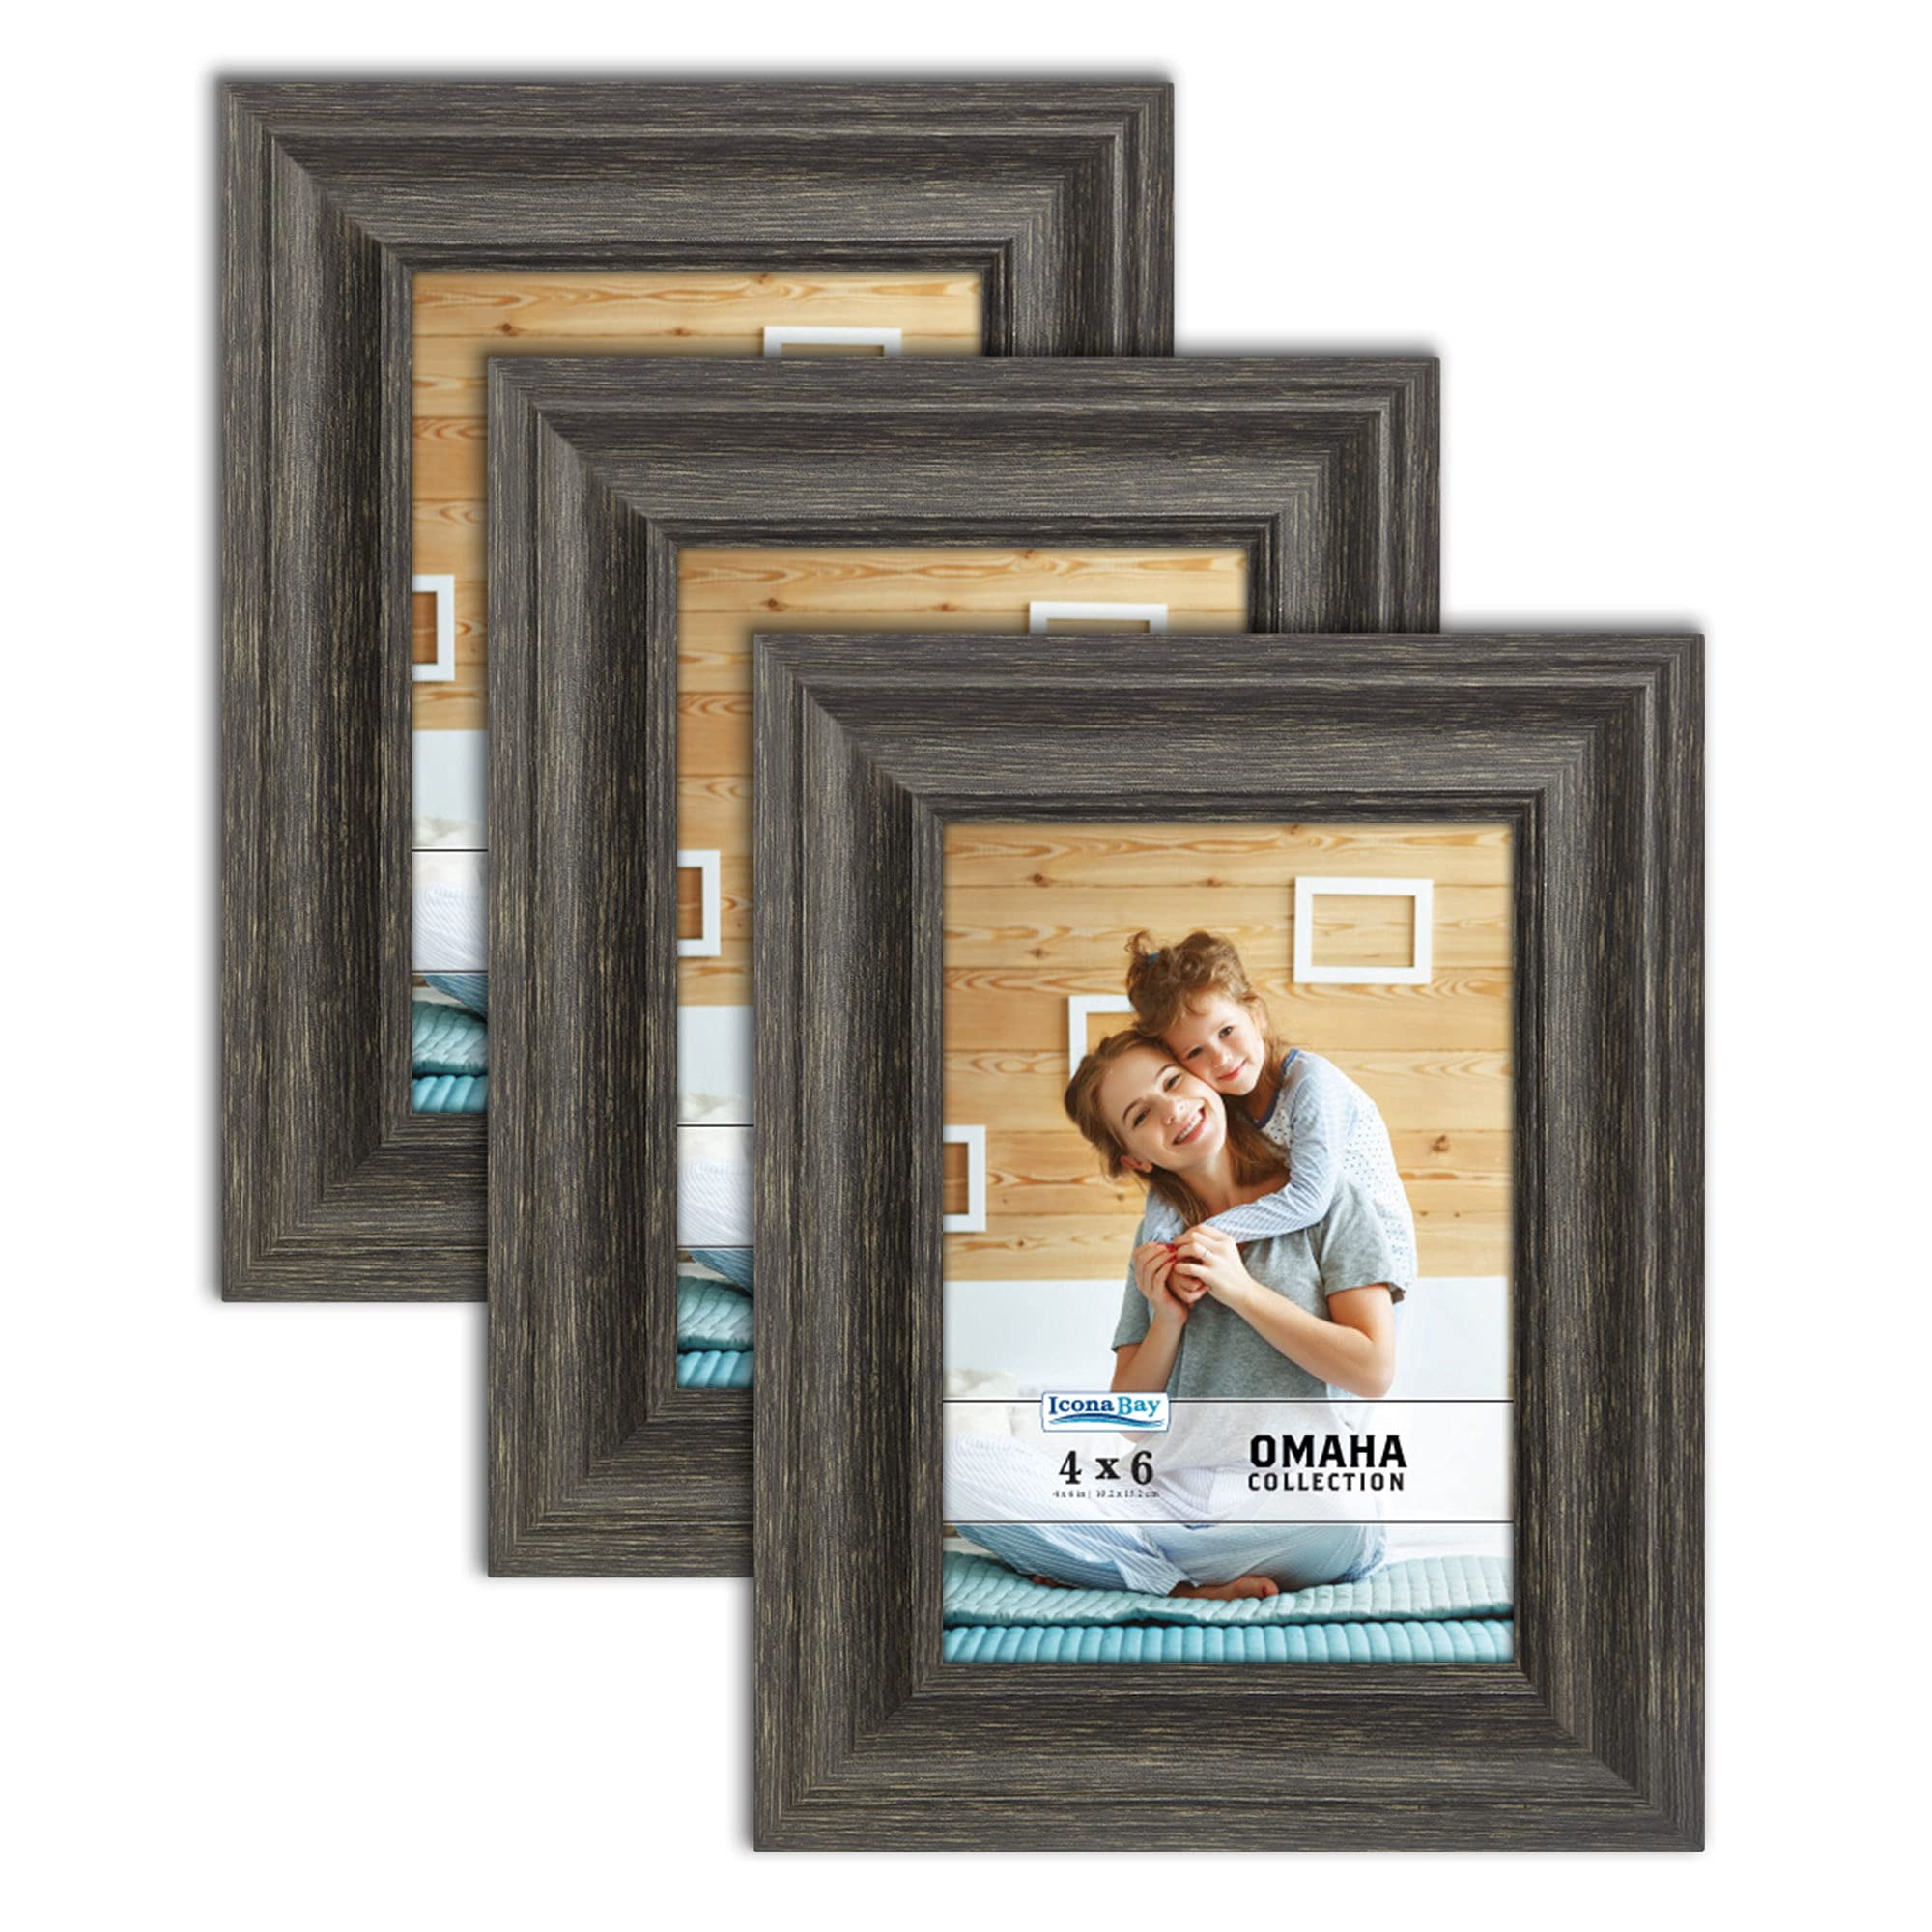 frametory, Accents, Nwt Frametory 8x8 Picture Frames